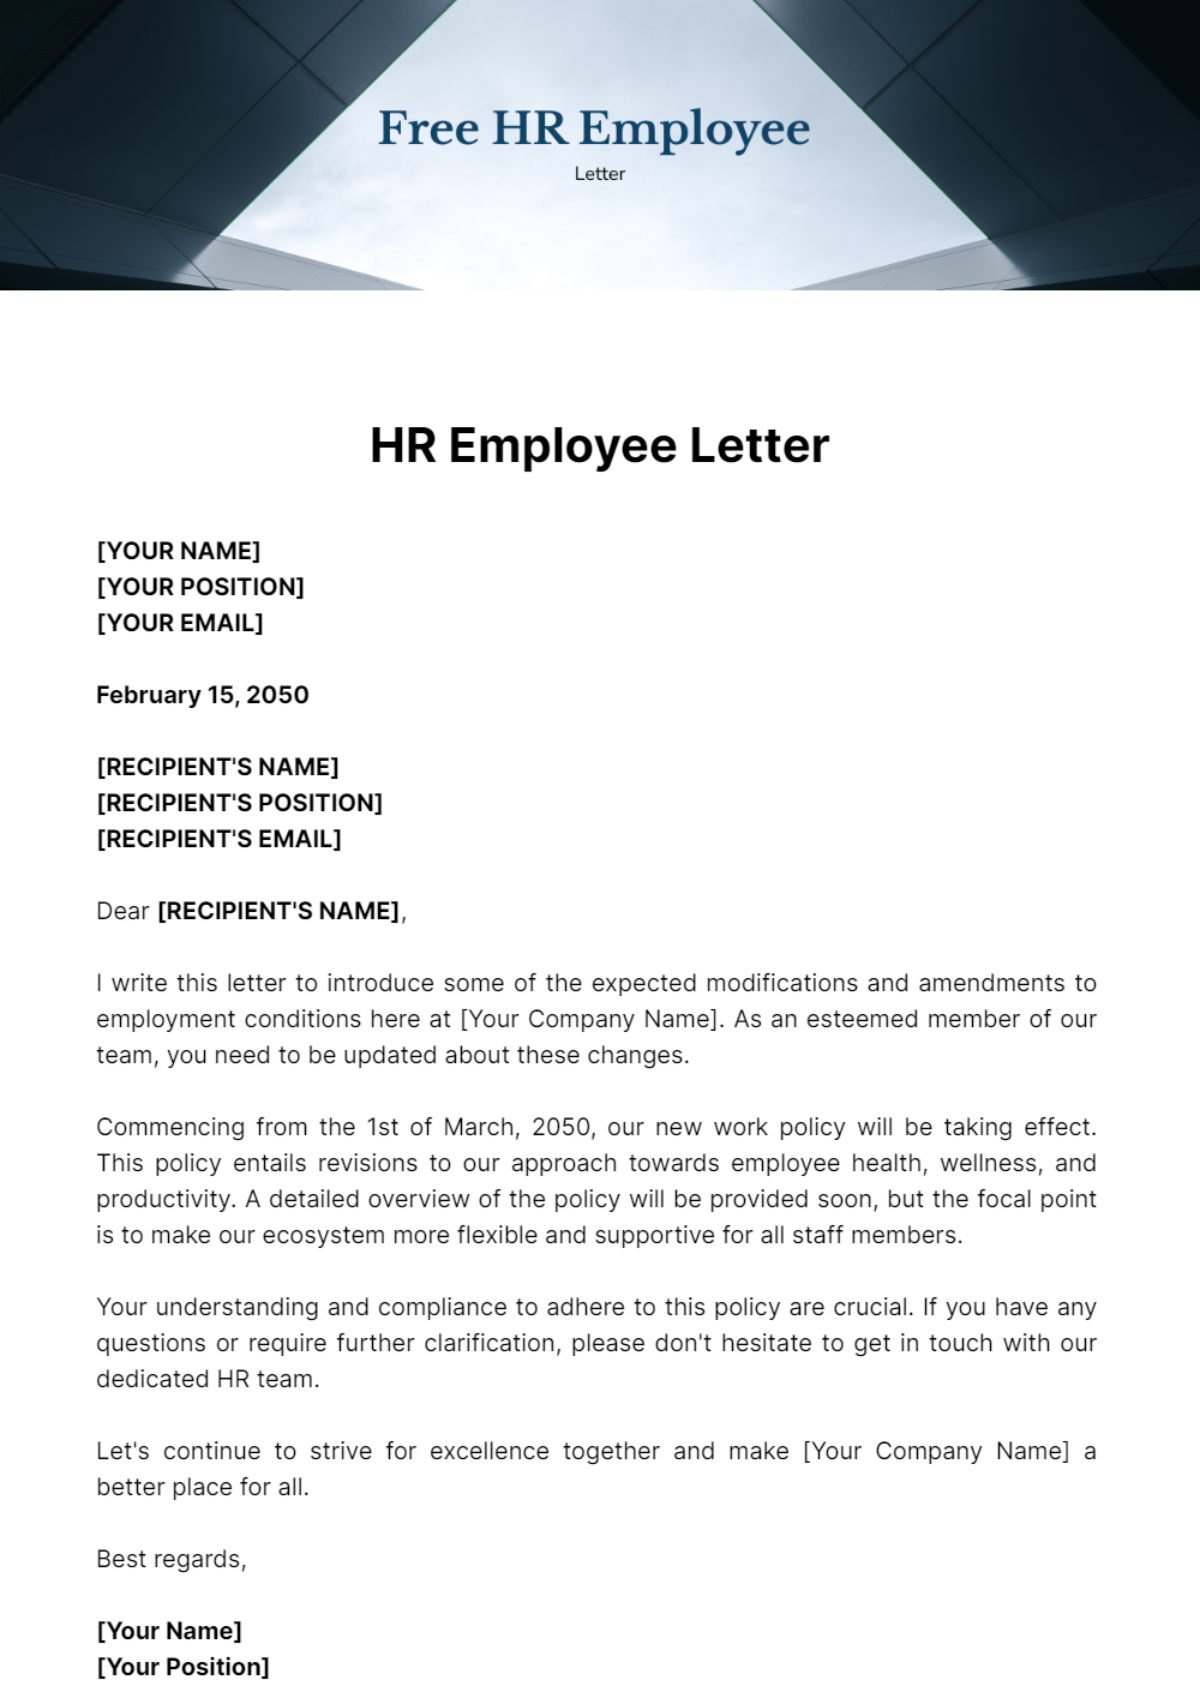 Free HR Employee Letter Template